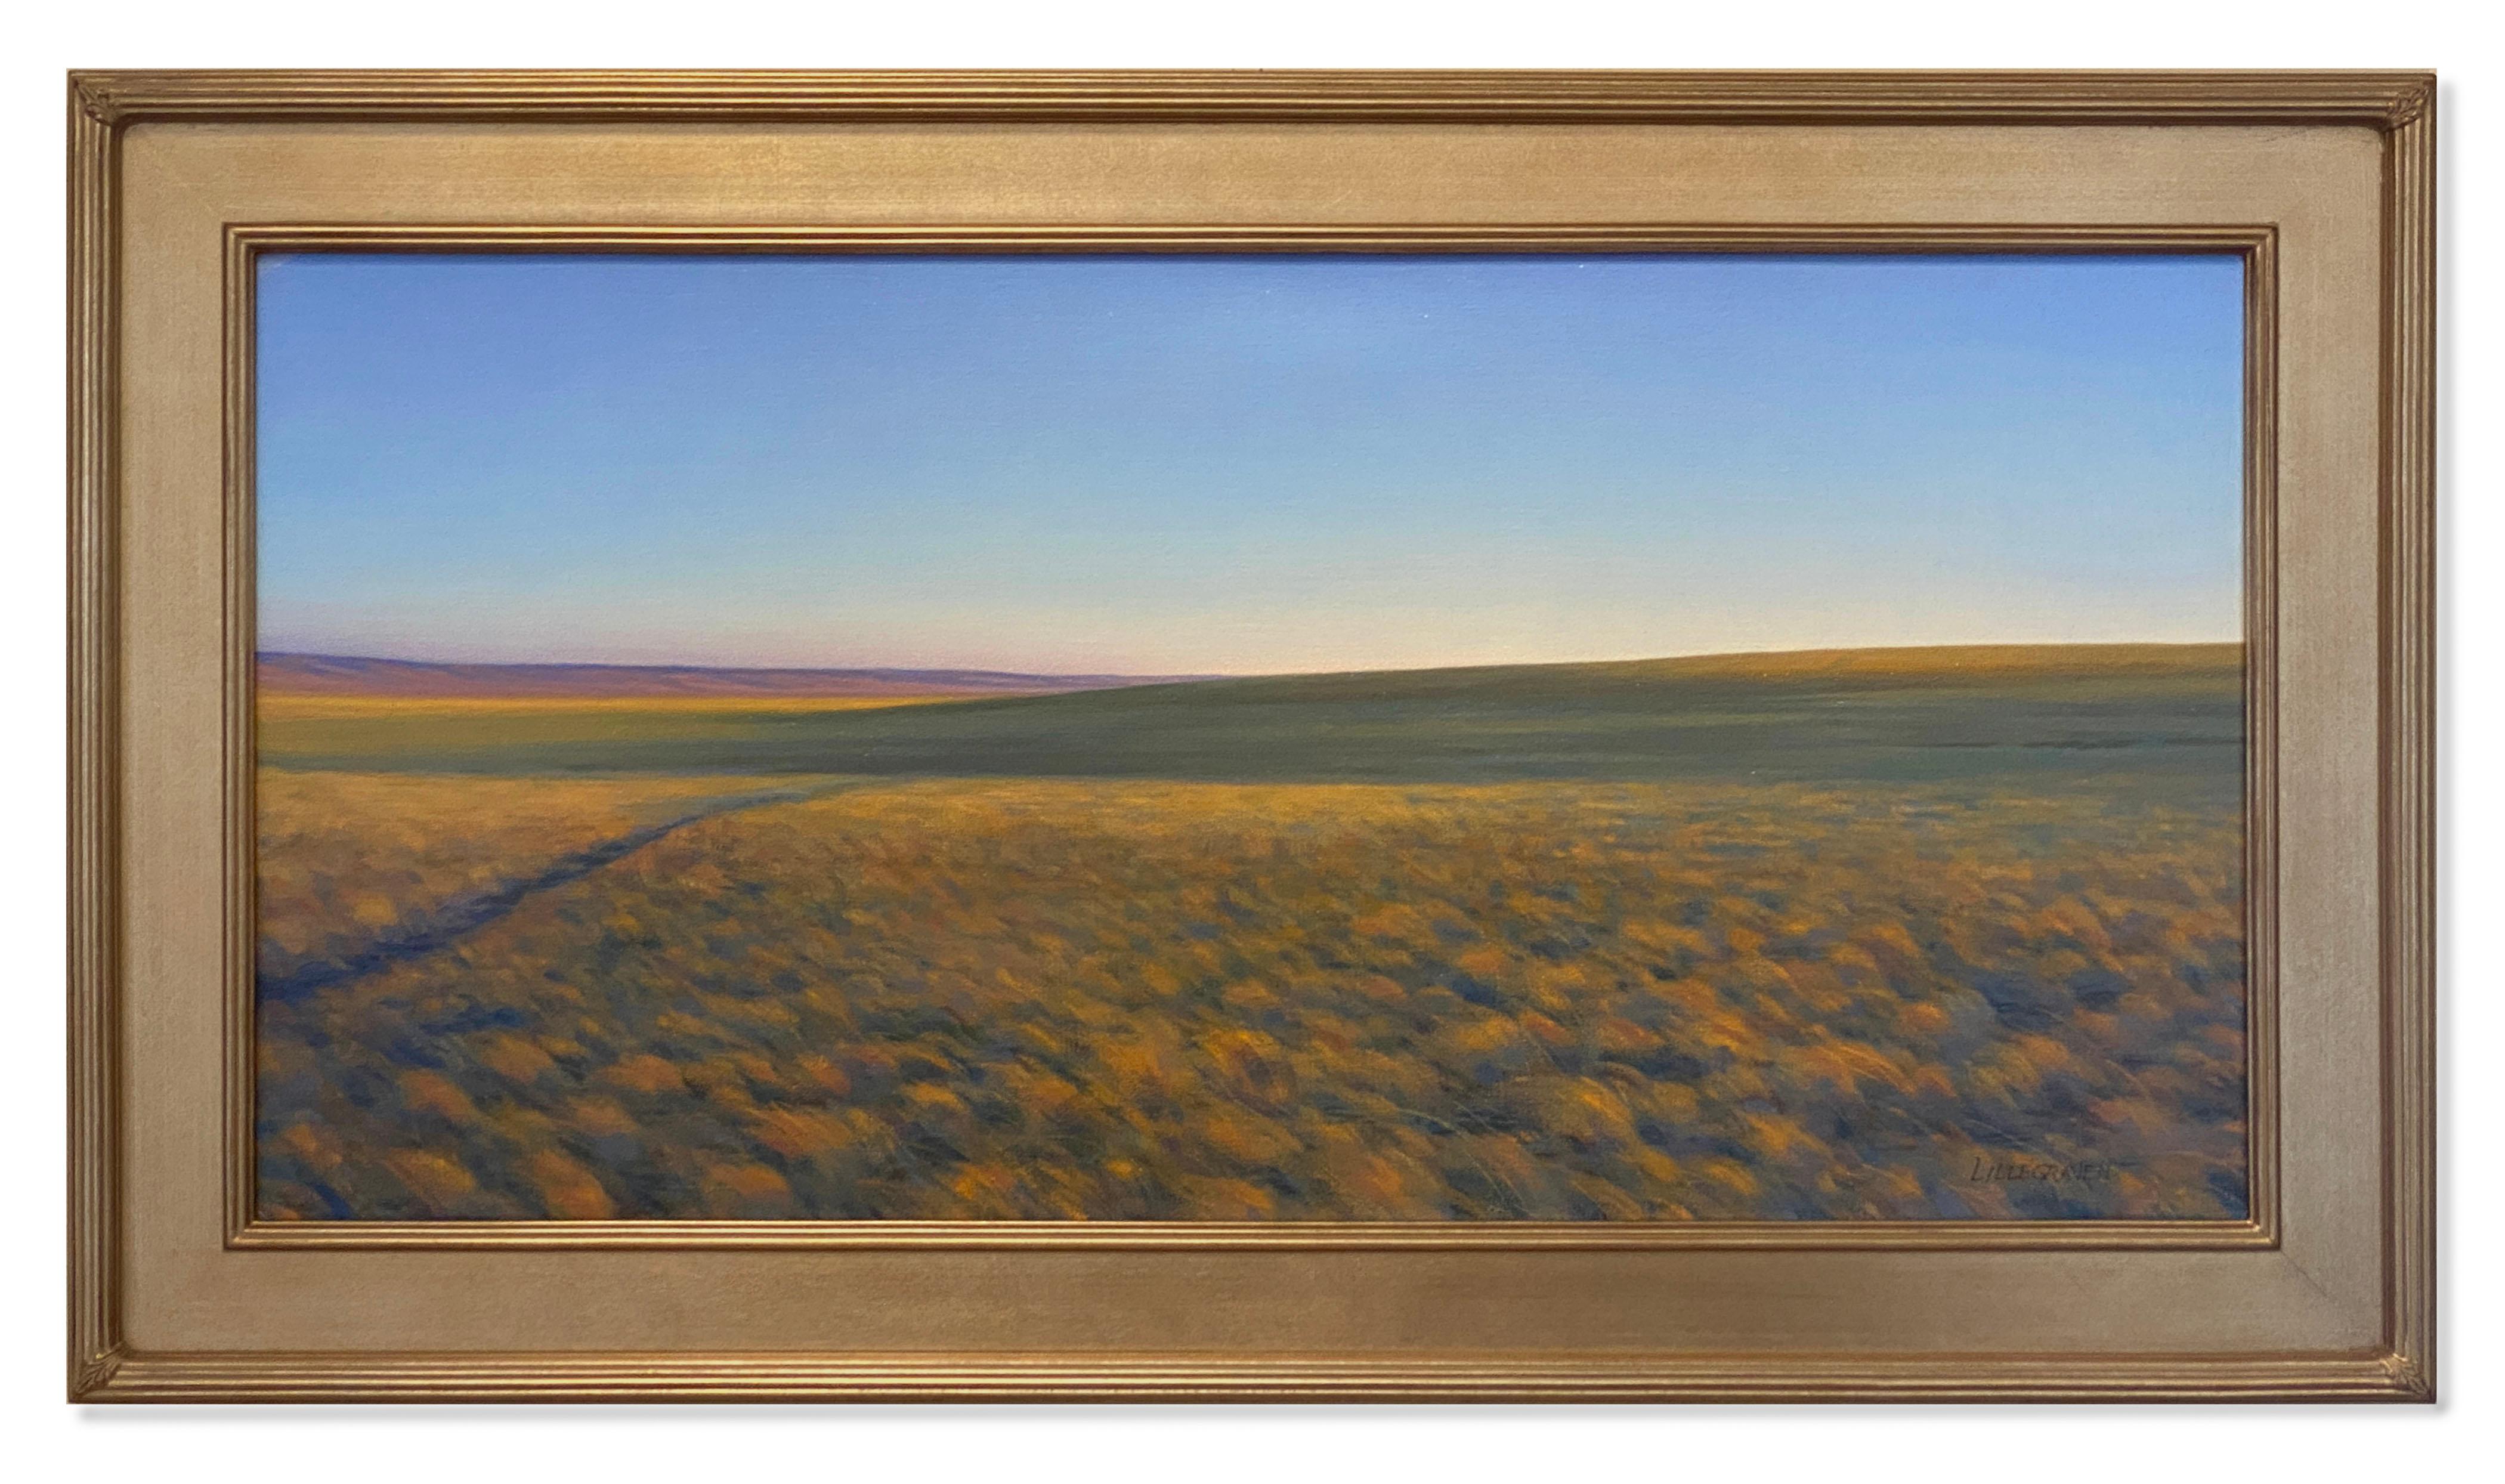 Pronghorn Path (landscape, Wyoming sky, open plains, grass, rainbow tones) - Painting by Linda Lillegraven